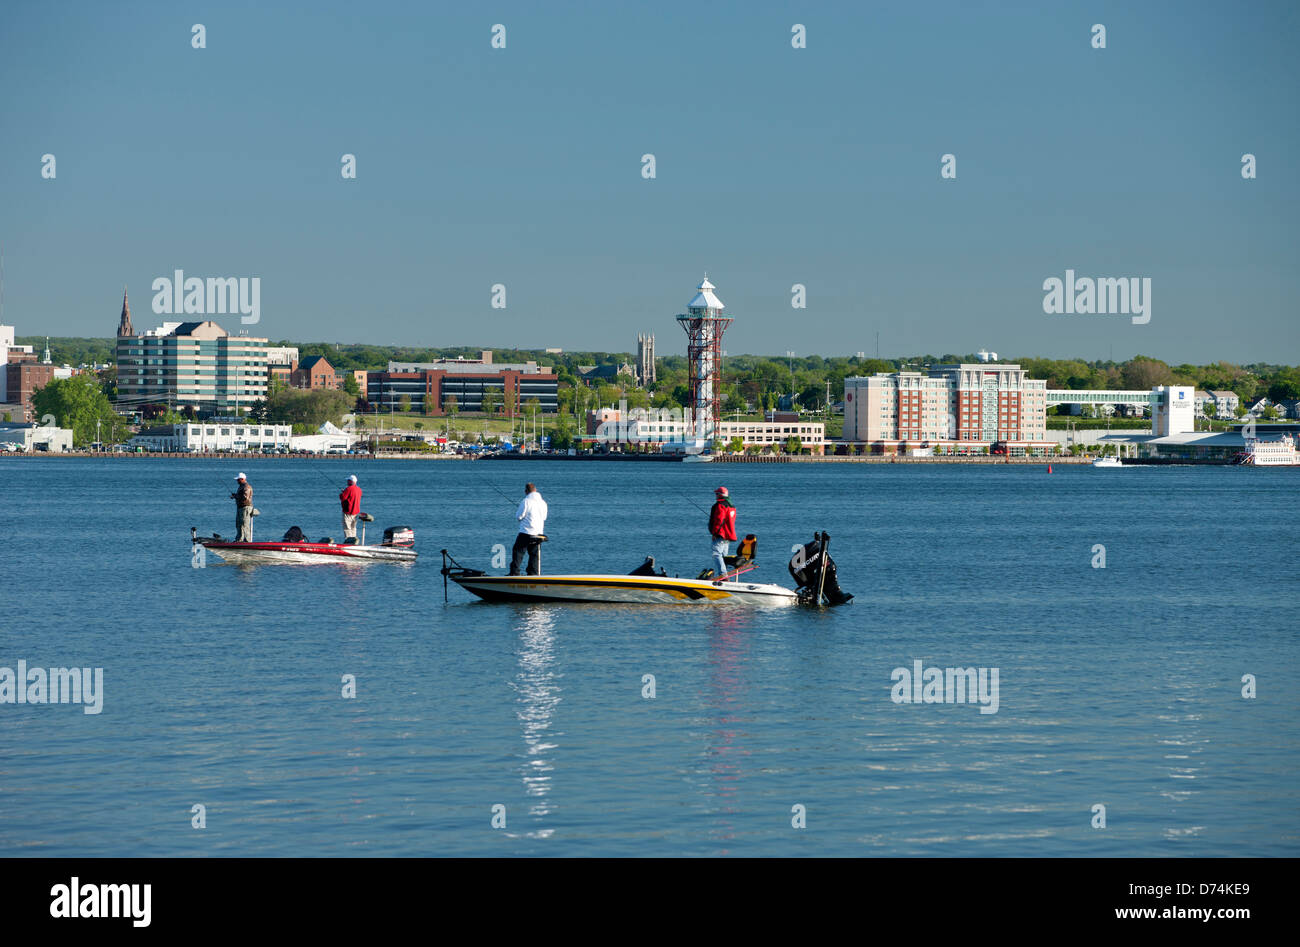 PEOPLE FISHING IN SMALL BOATS DOWNTOWN ERIE SKYLINE FROM PRESQUE ISLE STATE PARK ERIE PENNSYLVANIA USA Stock Photo